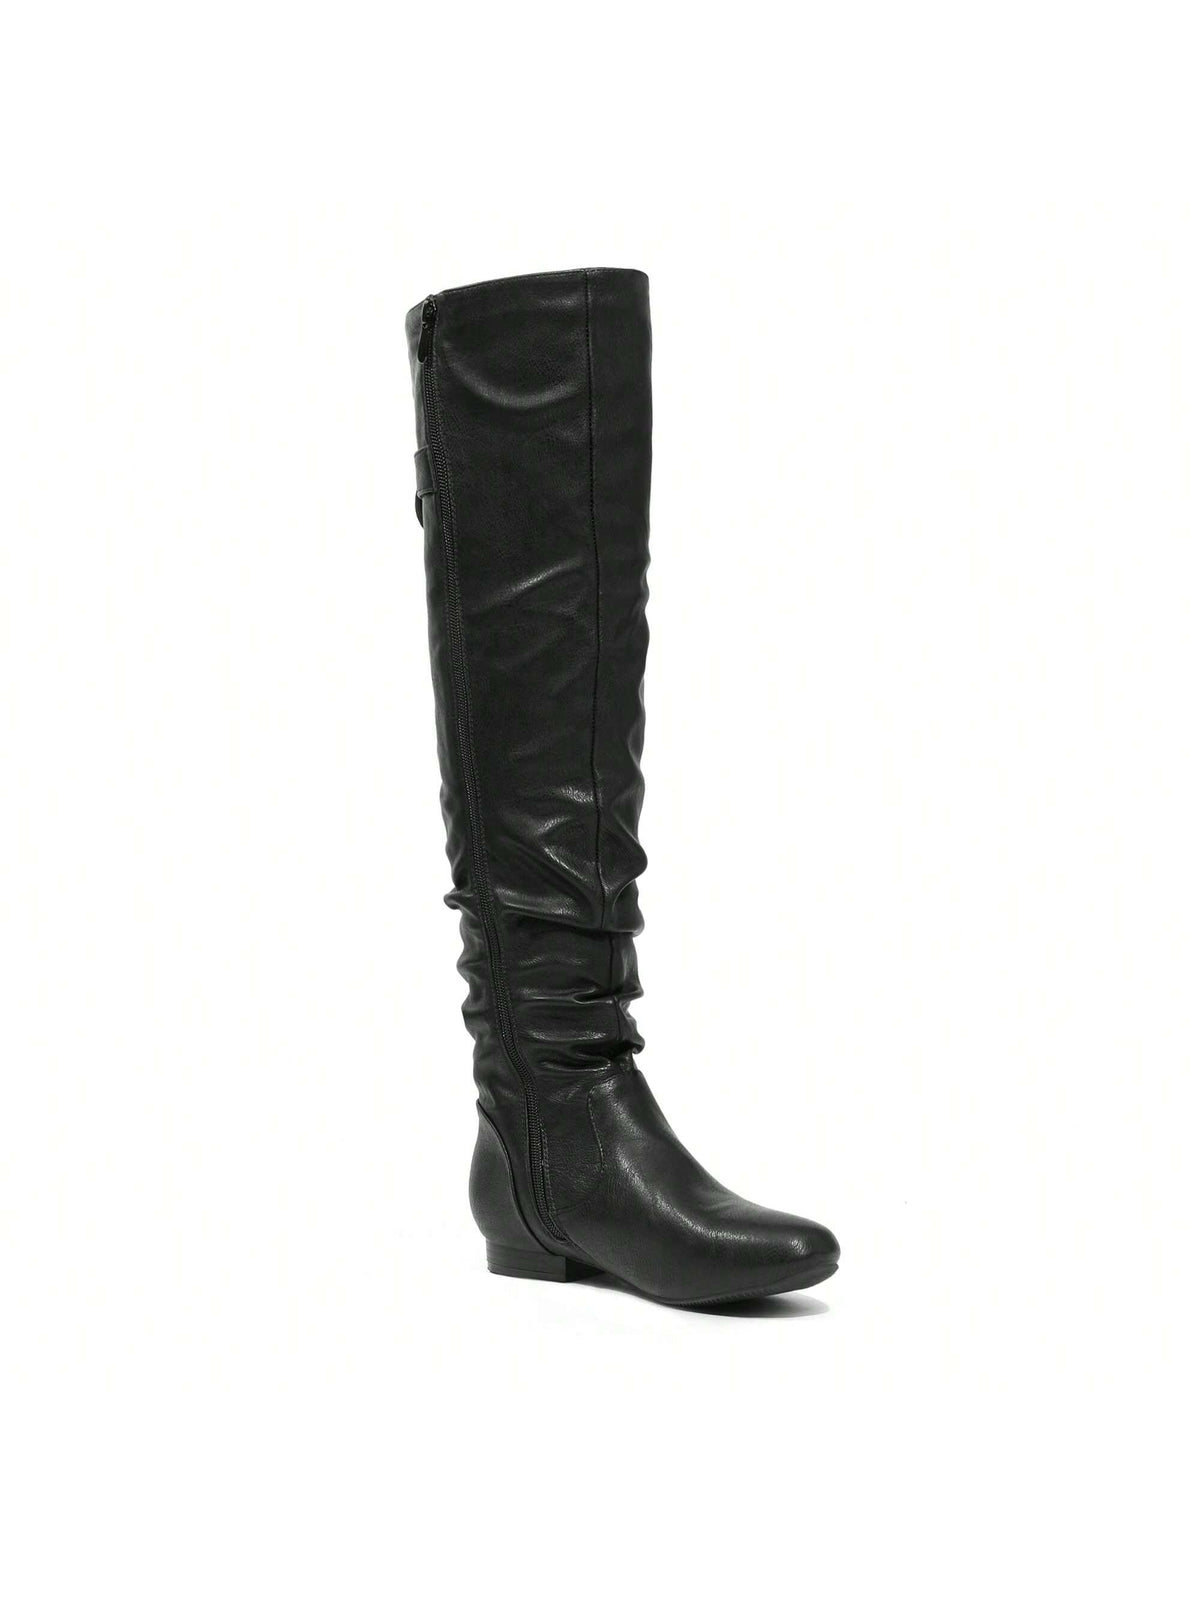 Women's Black Pull On Boots